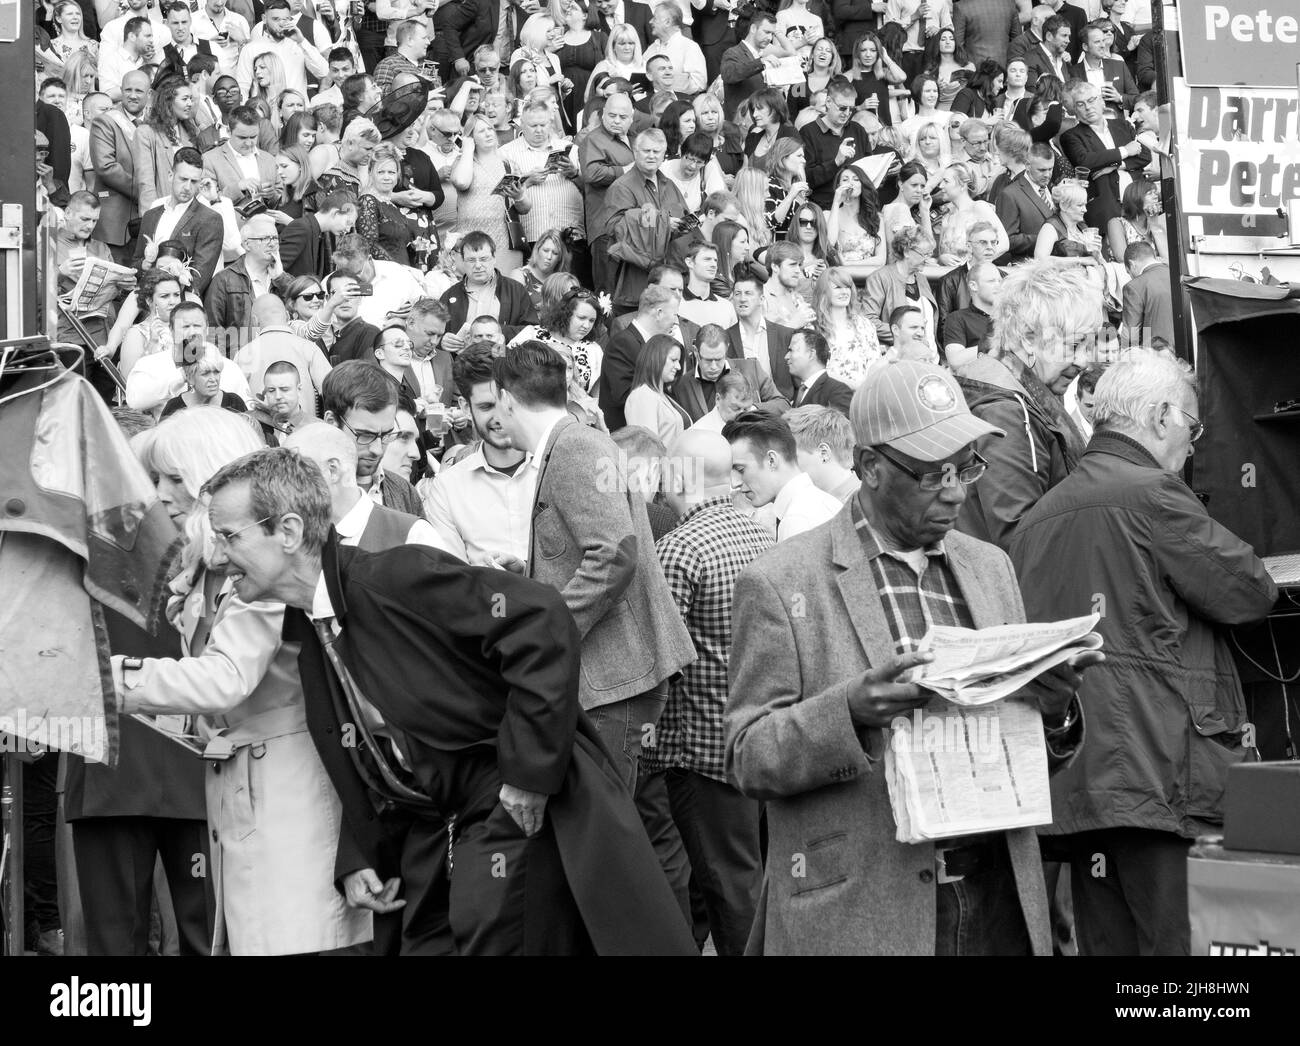 A grayscale shot of people gathered at Chester races enjoying their free time Stock Photo